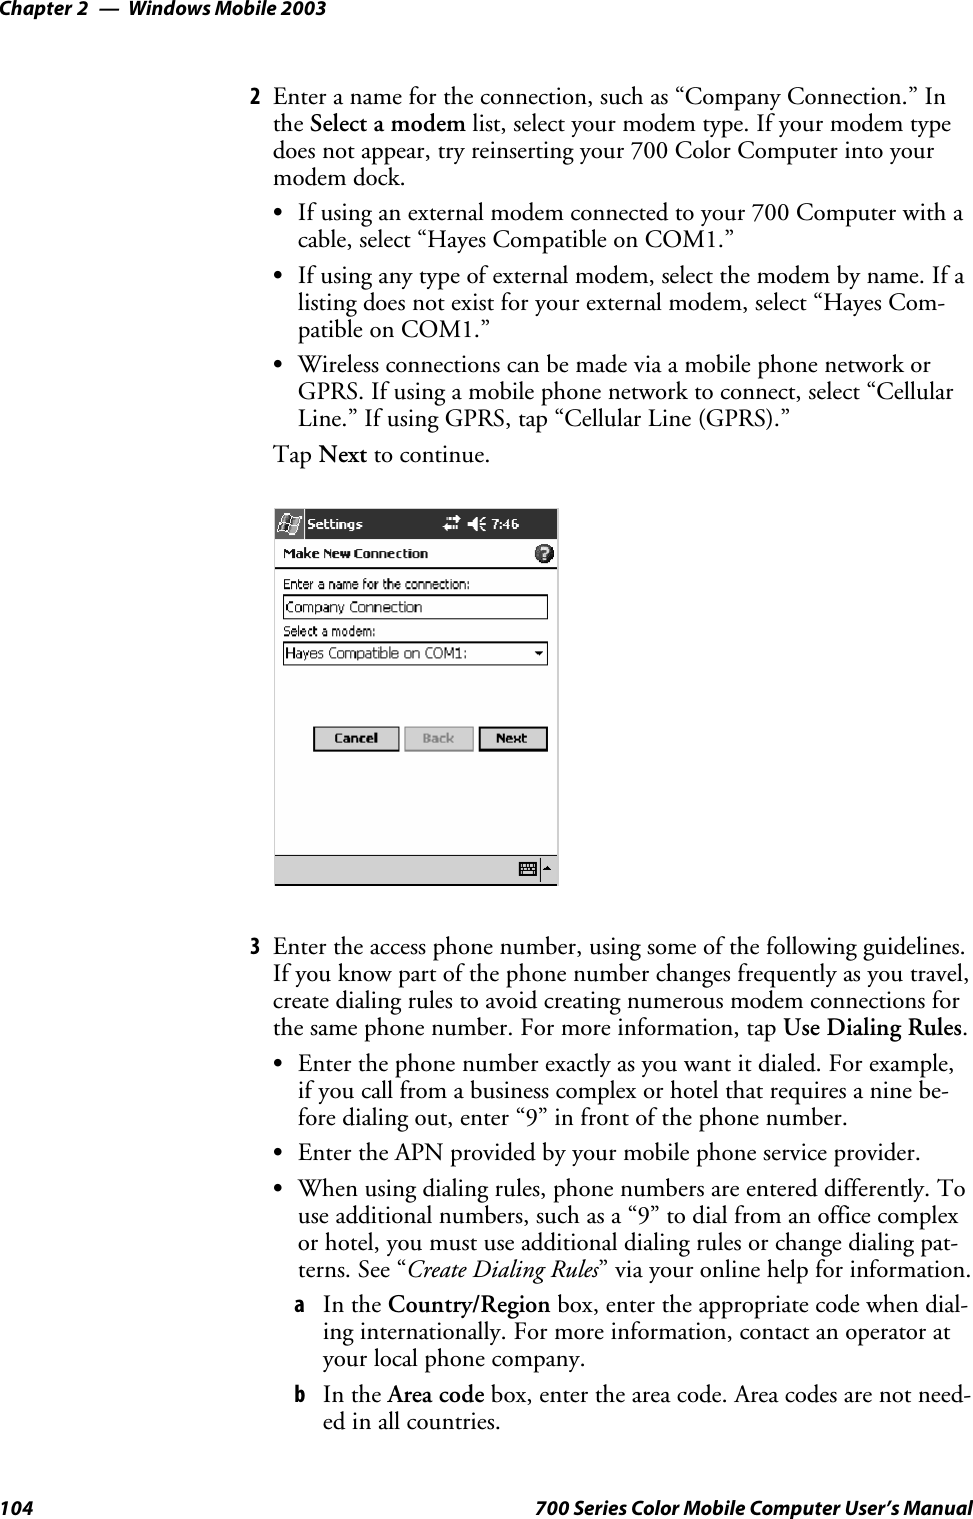 Windows Mobile 2003Chapter —2104 700 Series Color Mobile Computer User’s Manual2Enter a name for the connection, such as “Company Connection.” Inthe Select a modem list, select your modem type. If your modem typedoes not appear, try reinserting your 700 Color Computer into yourmodem dock.SIf using an external modem connected to your 700 Computer with acable, select “Hayes Compatible on COM1.”SIf using any type of external modem, select the modem by name. If alisting does not exist for your external modem, select “Hayes Com-patible on COM1.”SWireless connections can be made via a mobile phone network orGPRS. If using a mobile phone network to connect, select “CellularLine.” If using GPRS, tap “Cellular Line (GPRS).”Tap Next to continue.3Enter the access phone number, using some of the following guidelines.If you know part of the phone number changes frequently as you travel,create dialing rules to avoid creating numerous modem connections forthe same phone number. For more information, tap Use Dialing Rules.SEnterthephonenumberexactlyasyouwantitdialed.Forexample,if you call from a business complex or hotel that requires a nine be-fore dialing out, enter “9” in front of the phone number.SEnter the APN provided by your mobile phone service provider.SWhen using dialing rules, phone numbers are entered differently. Touse additional numbers, such as a “9” to dial from an office complexor hotel, you must use additional dialing rules or change dialing pat-terns. See “Create Dialing Rules” via your online help for information.aIn the Country/Region box, enter the appropriate code when dial-ing internationally. For more information, contact an operator atyour local phone company.bIn the Area code box, enter the area code. Area codes are not need-ed in all countries.